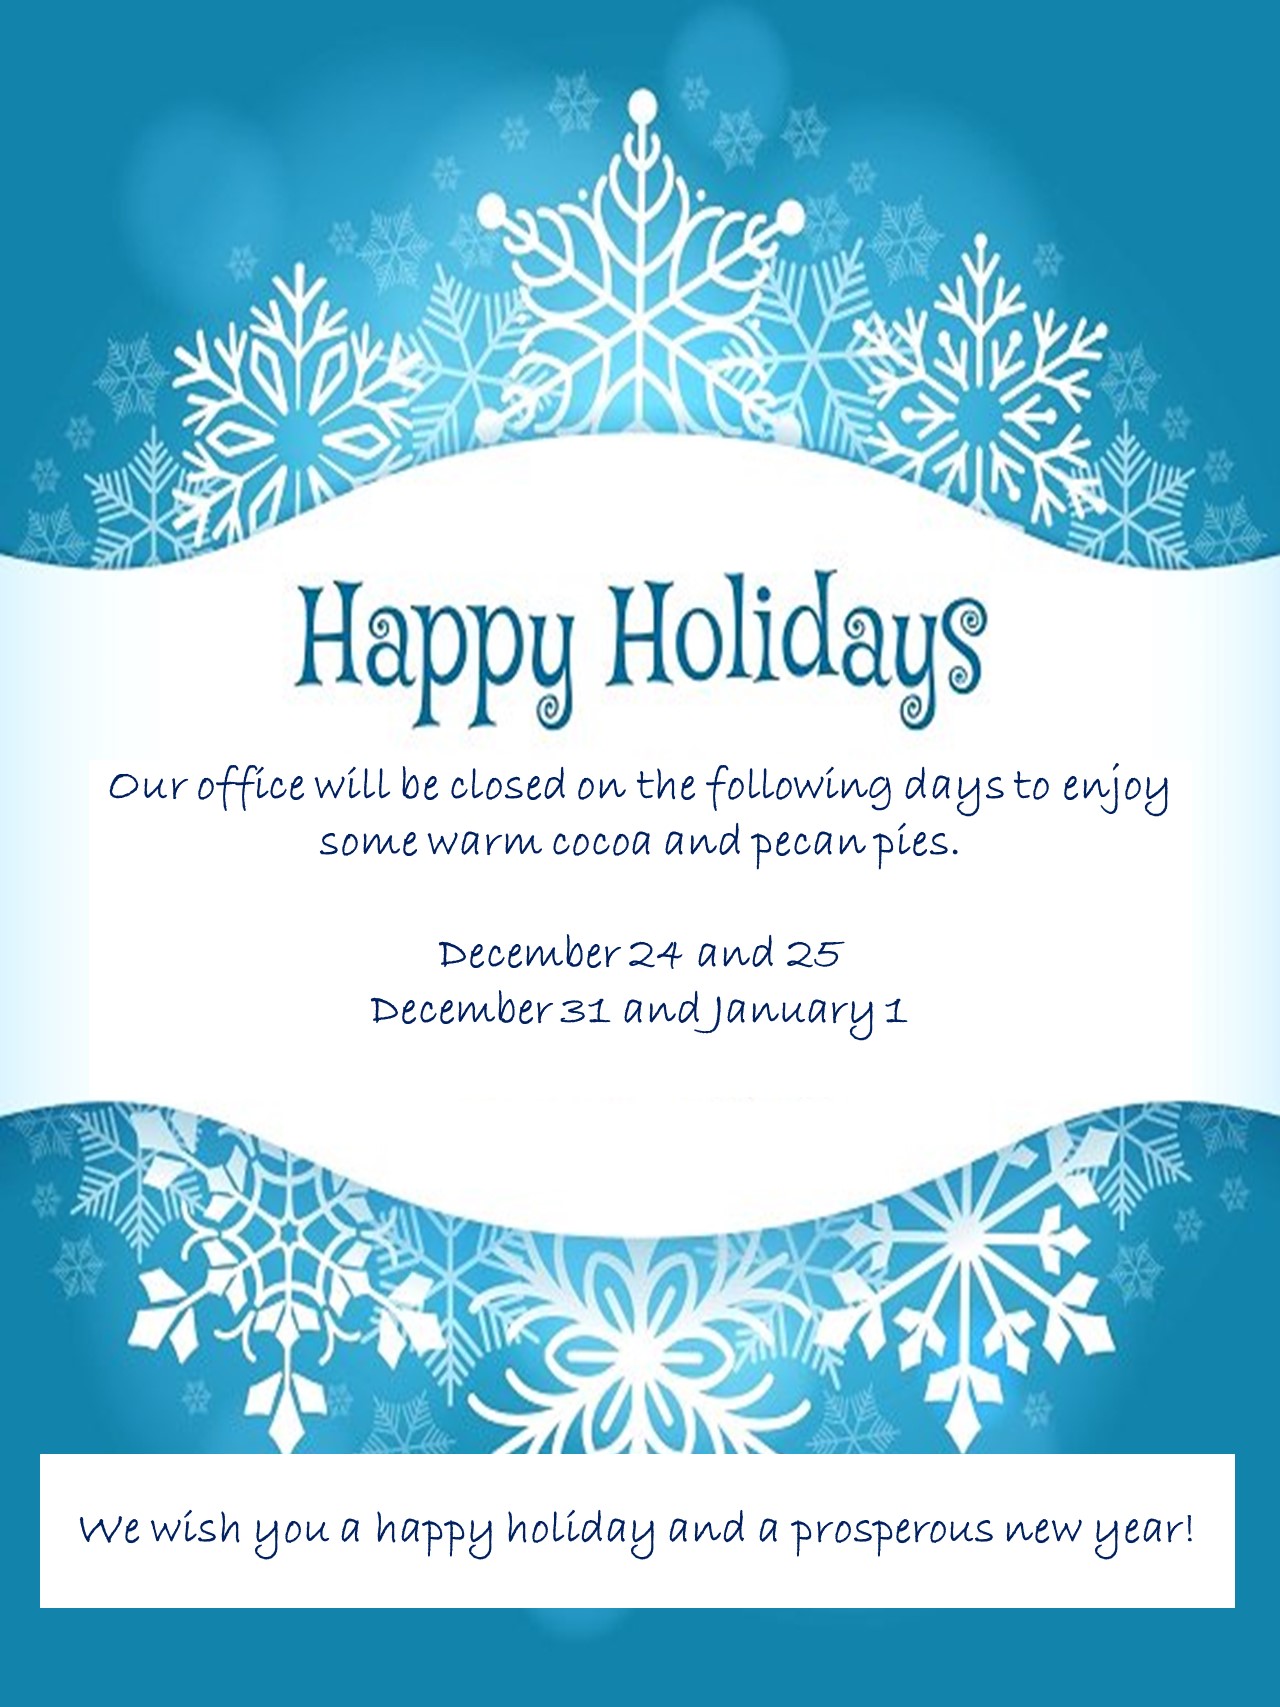 AG Holiday Office Hours